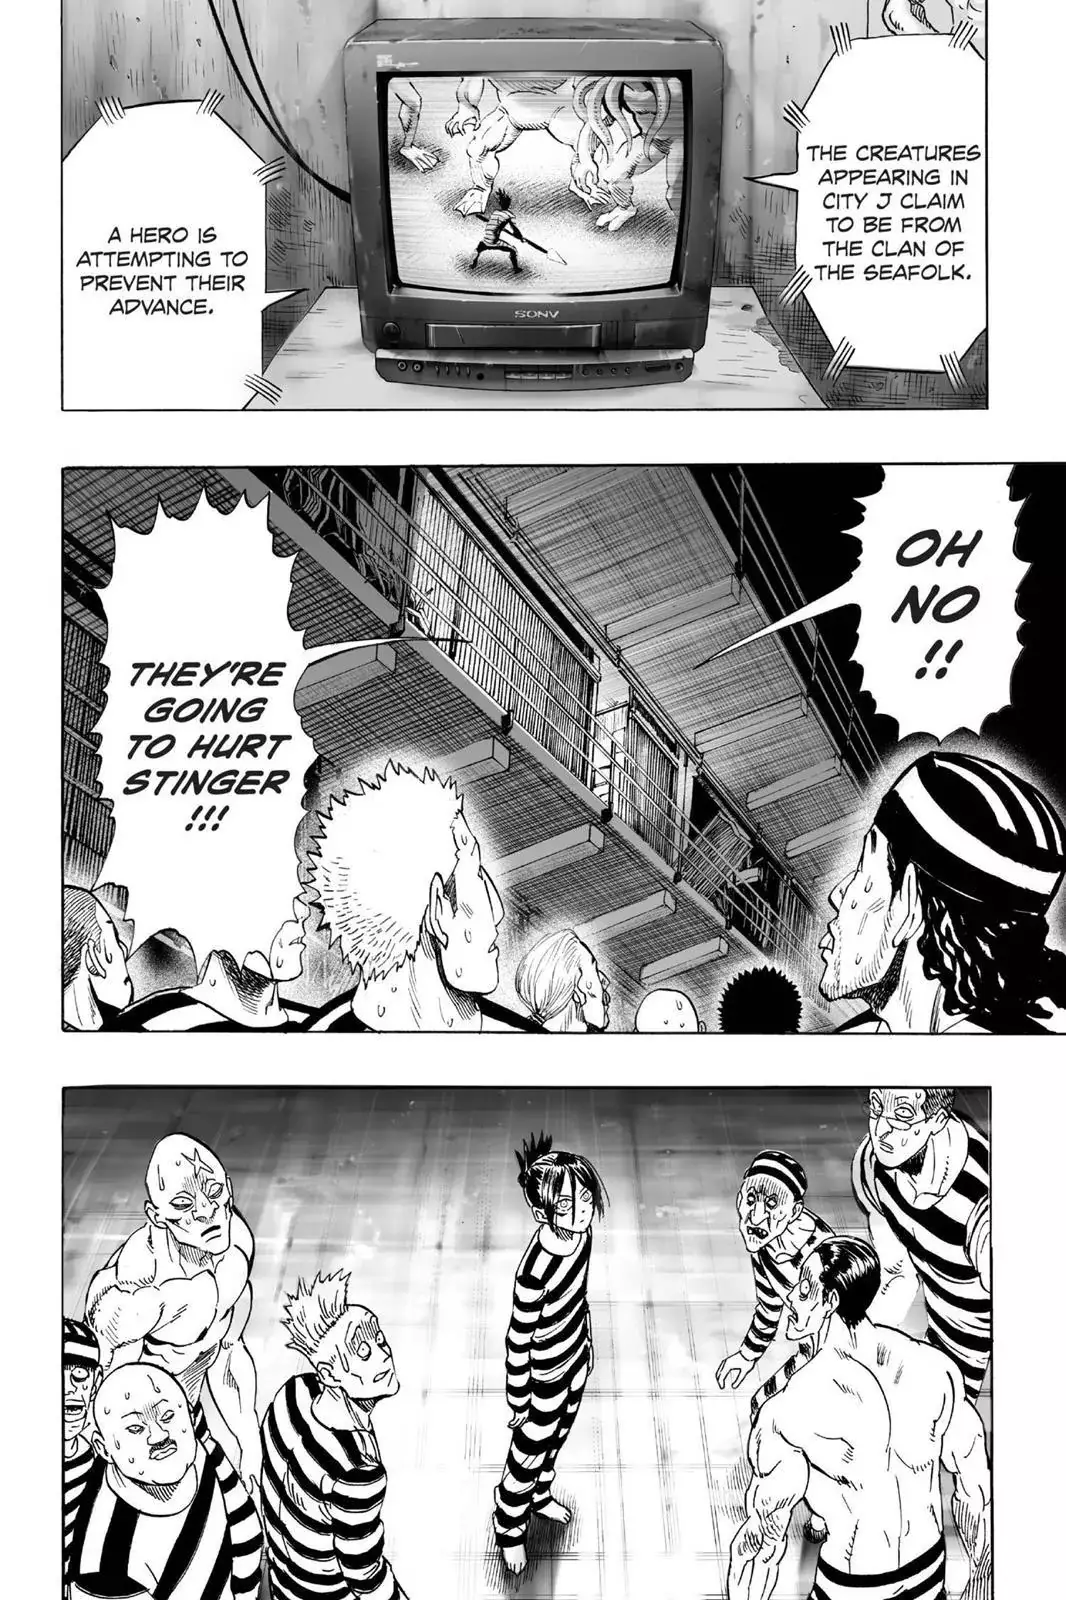 One Punch Man Chapter 24, READ One Punch Man Chapter 24 ONLINE, lost in the cloud genre,lost in the cloud gif,lost in the cloud girl,lost in the cloud goods,lost in the cloud goodreads,lost in the cloud,lost ark cloud gaming,lost odyssey cloud gaming,lost in the cloud fanart,lost in the cloud fanfic,lost in the cloud fandom,lost in the cloud first kiss,lost in the cloud font,lost in the cloud ending,lost in the cloud episode 97,lost in the cloud edit,lost in the cloud explained,lost in the cloud dog,lost in the cloud discord server,lost in the cloud desktop wallpaper,lost in the cloud drawing,can't find my cloud on network,lost in the cloud characters,lost in the cloud chapter 93 release date,lost in the cloud birthday,lost in the cloud birthday art,lost in the cloud background,lost in the cloud banner,lost in the clouds meaning,what is the black cloud in lost,lost in the cloud ao3,lost in the cloud anime,lost in the cloud art,lost in the cloud author twitter,lost in the cloud author instagram,lost in the cloud artist,lost in the cloud acrylic stand,lost in the cloud artist twitter,lost in the cloud art style,lost in the cloud analysis